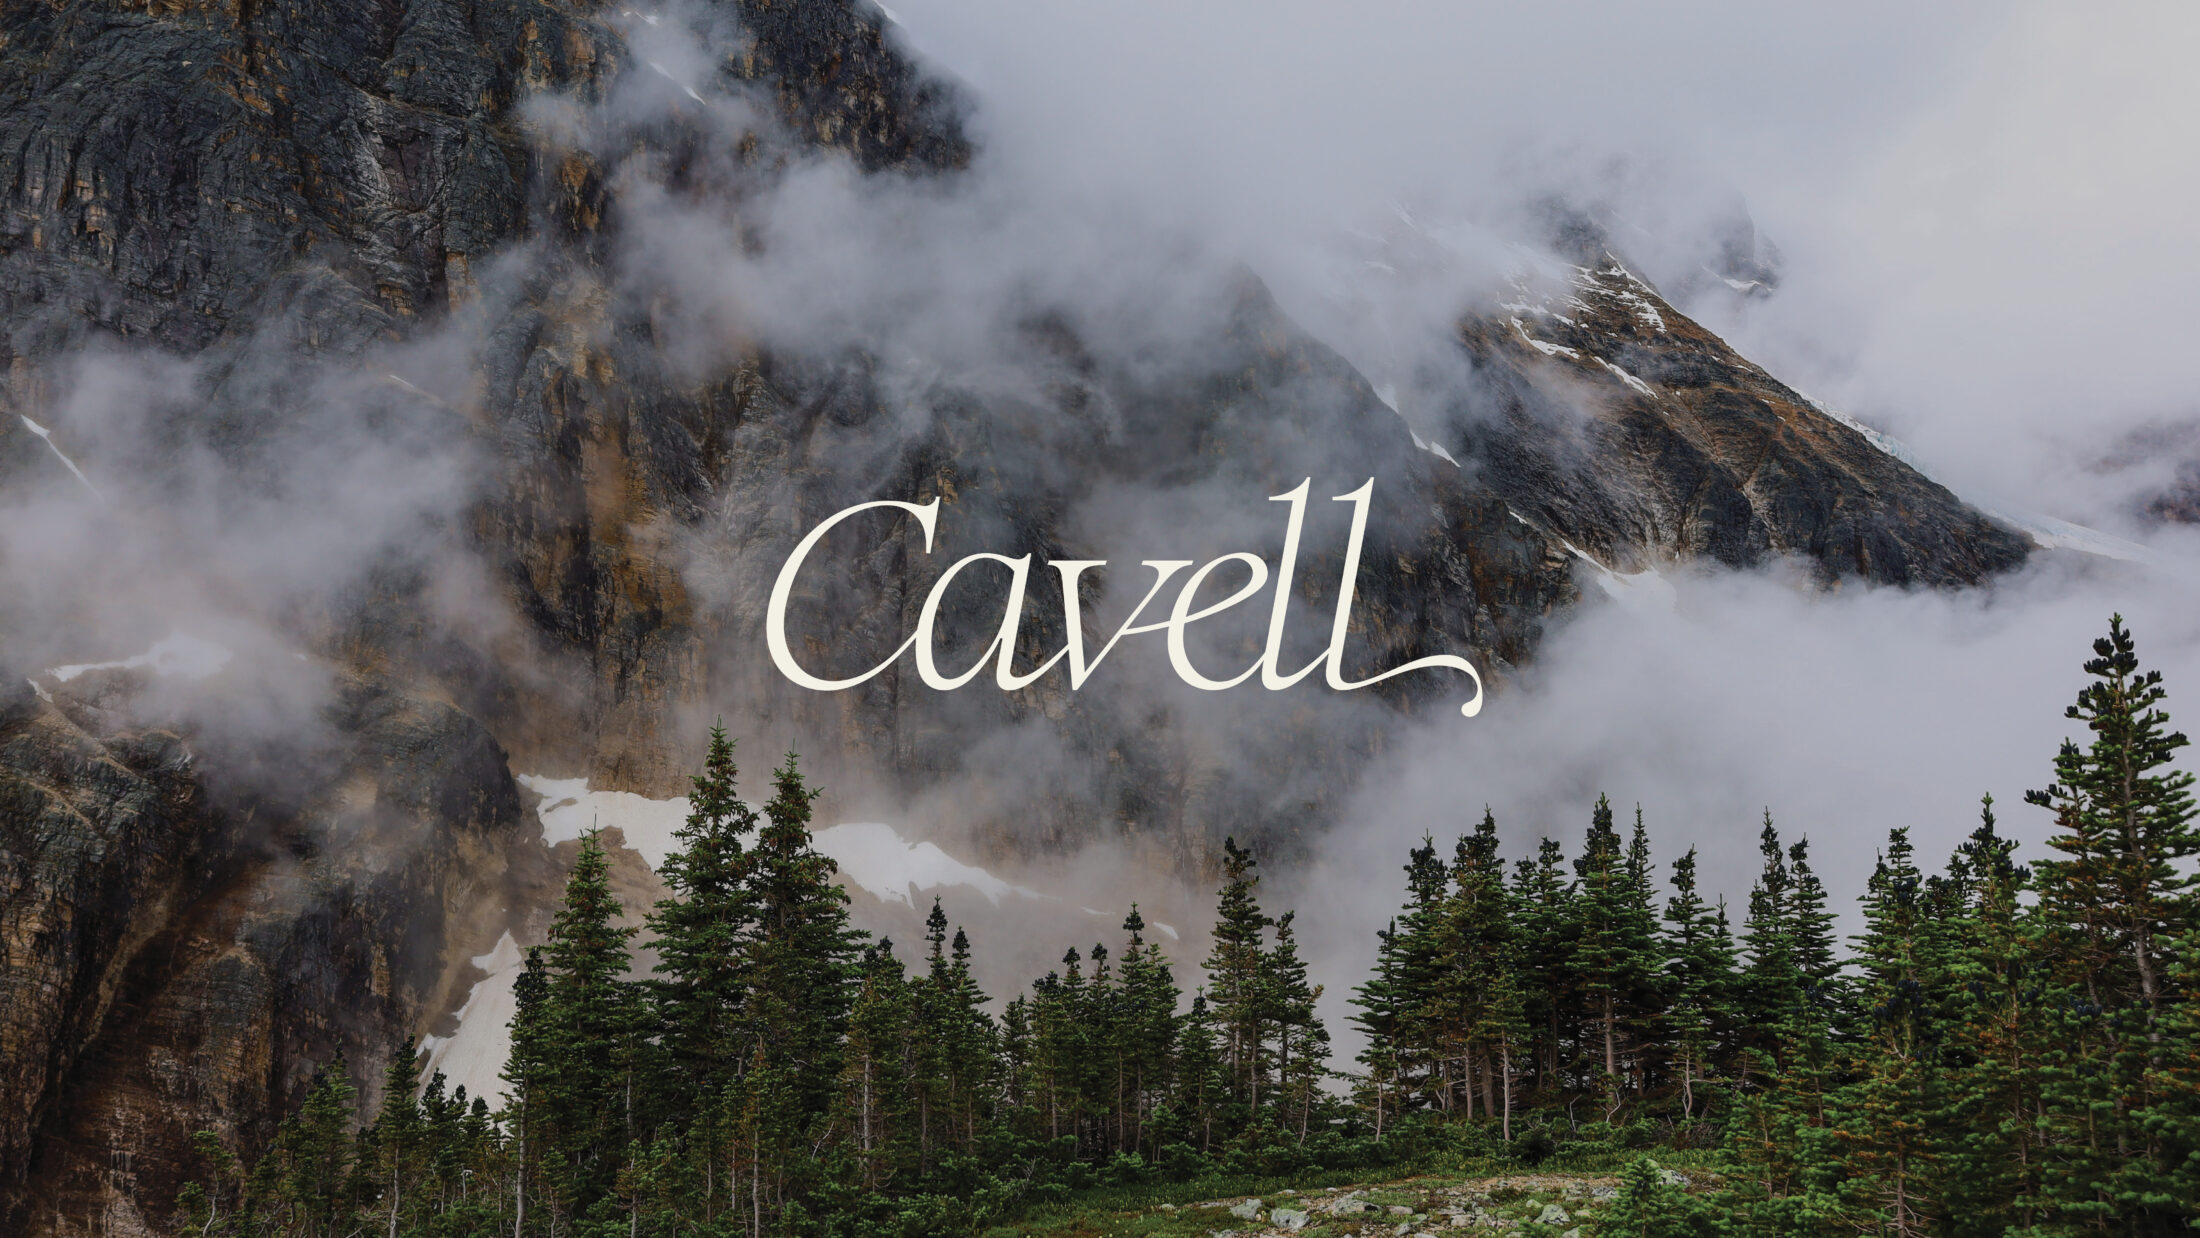 Cavell: Cavell